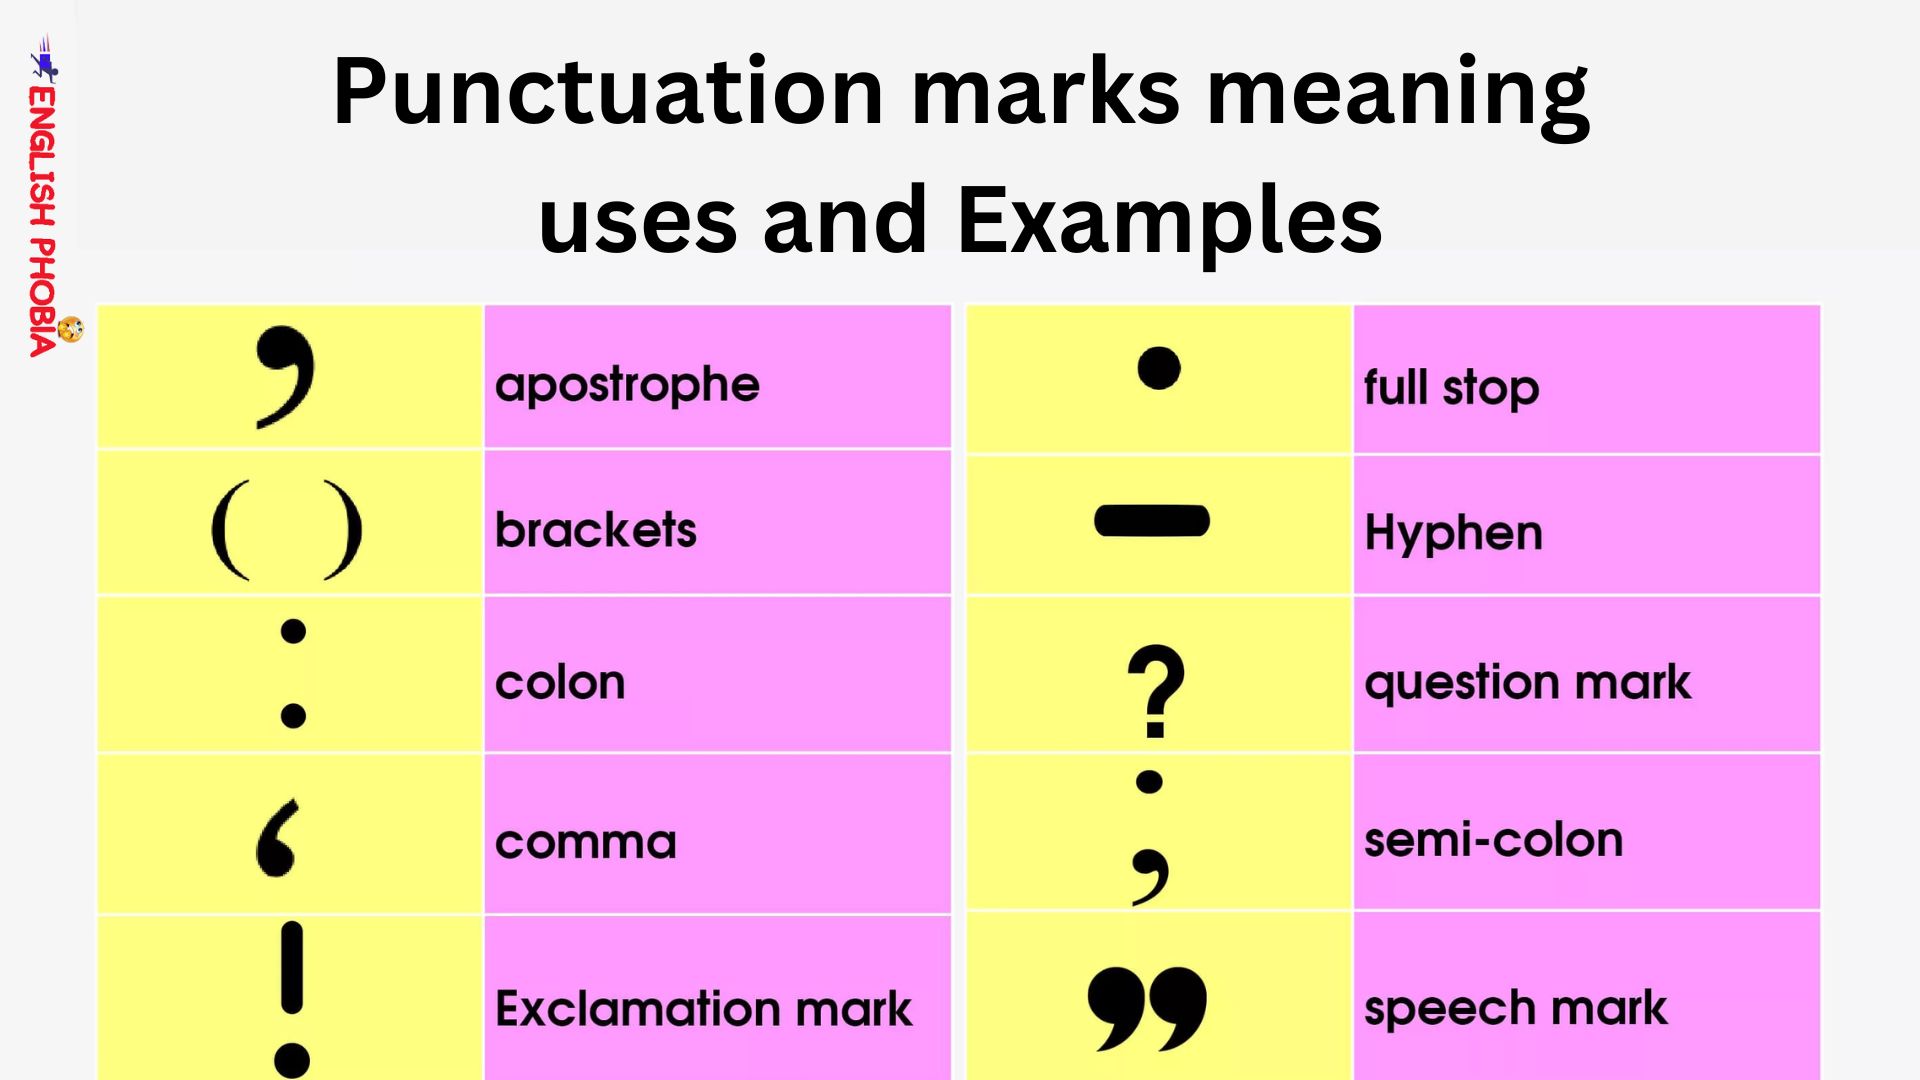 Punctuation marks meaning uses and examples (1)